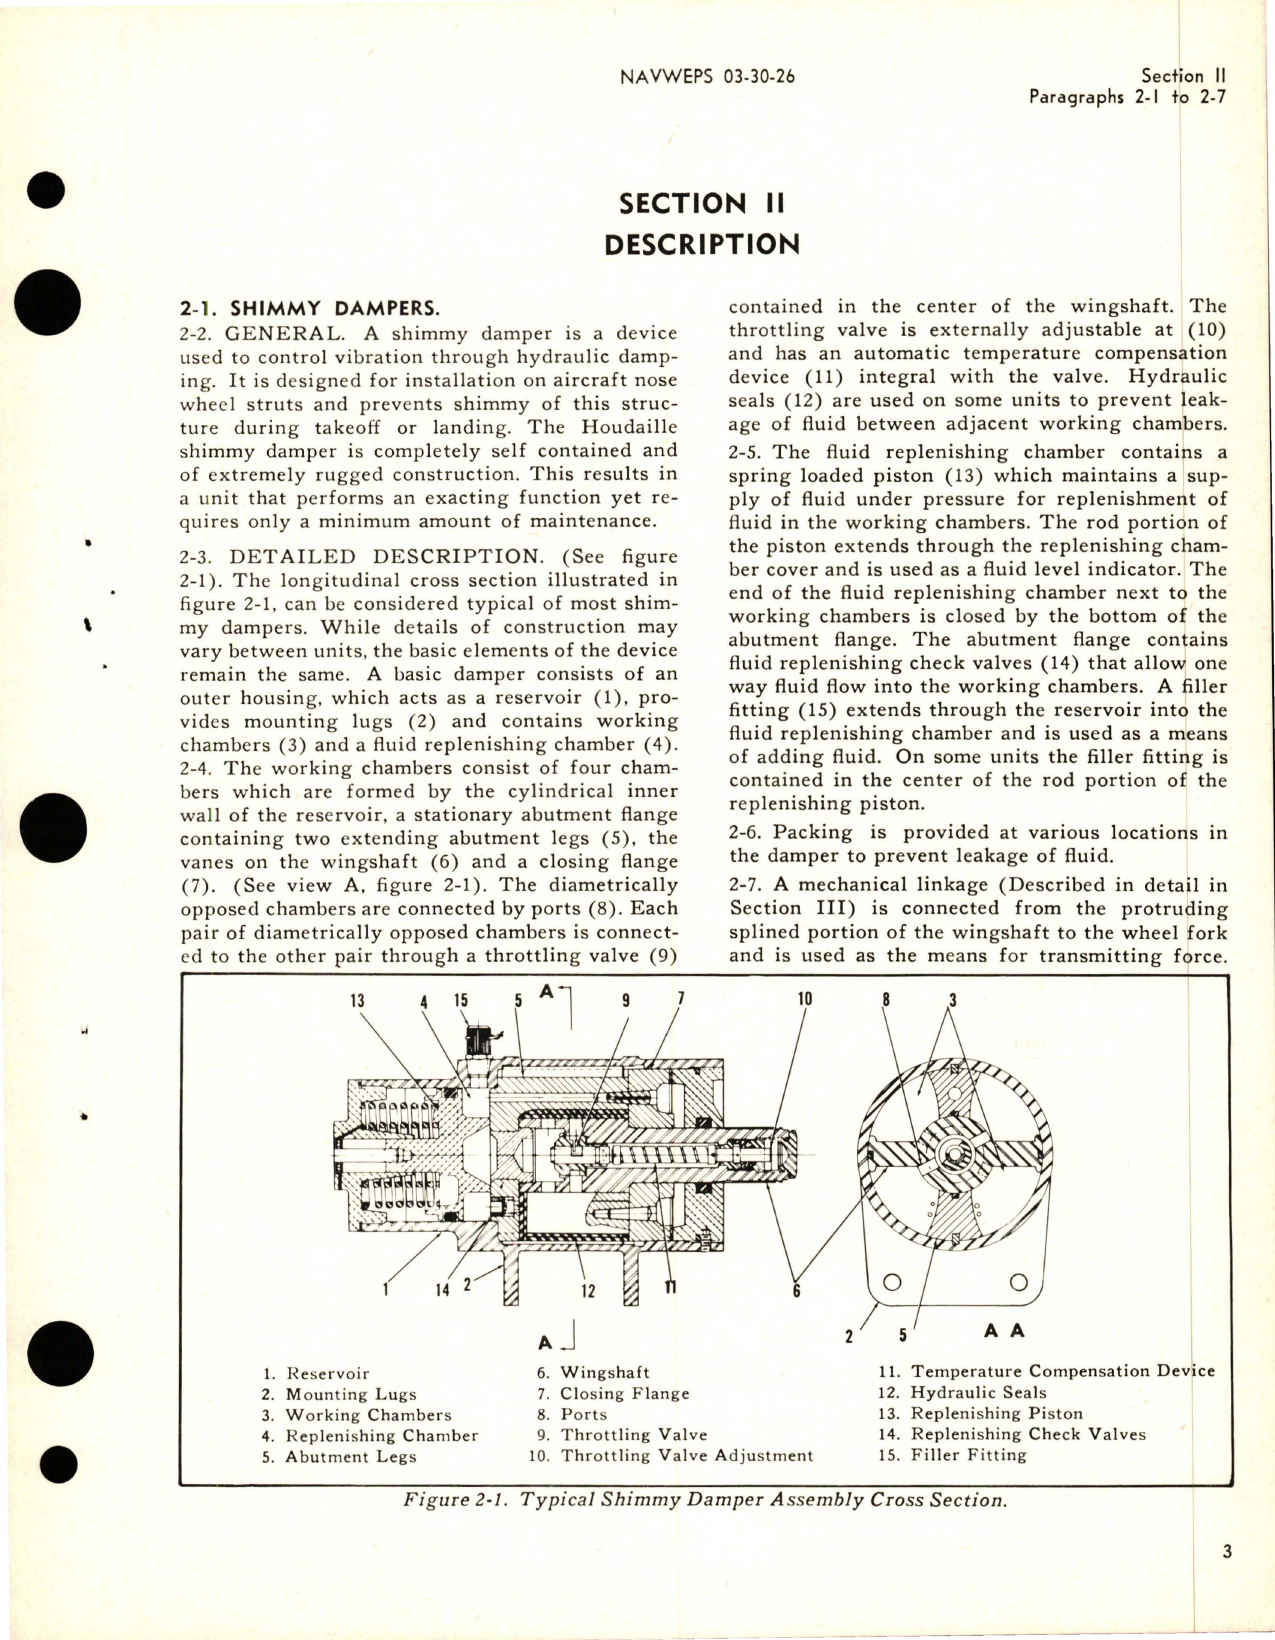 Sample page 7 from AirCorps Library document: Operation, Service and Overhaul Instructions with Illustrated Parts for Shimmy Dampers - Helicopter Dampers - Steer Dampers